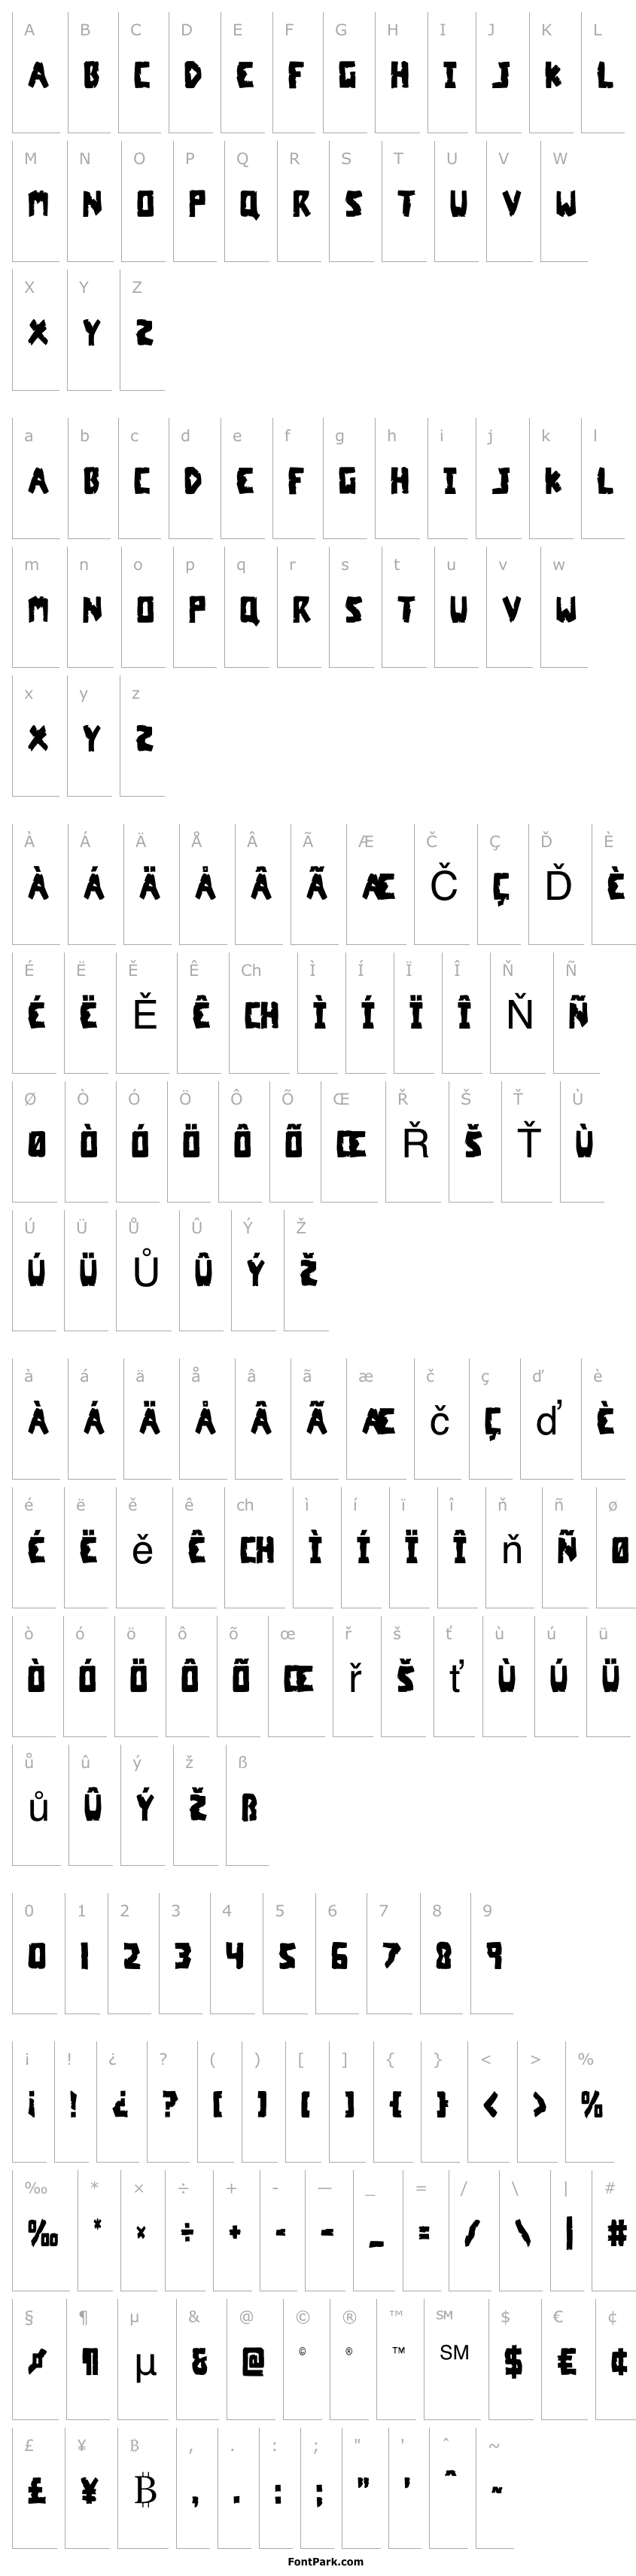 Overview Coffin Stone Condensed